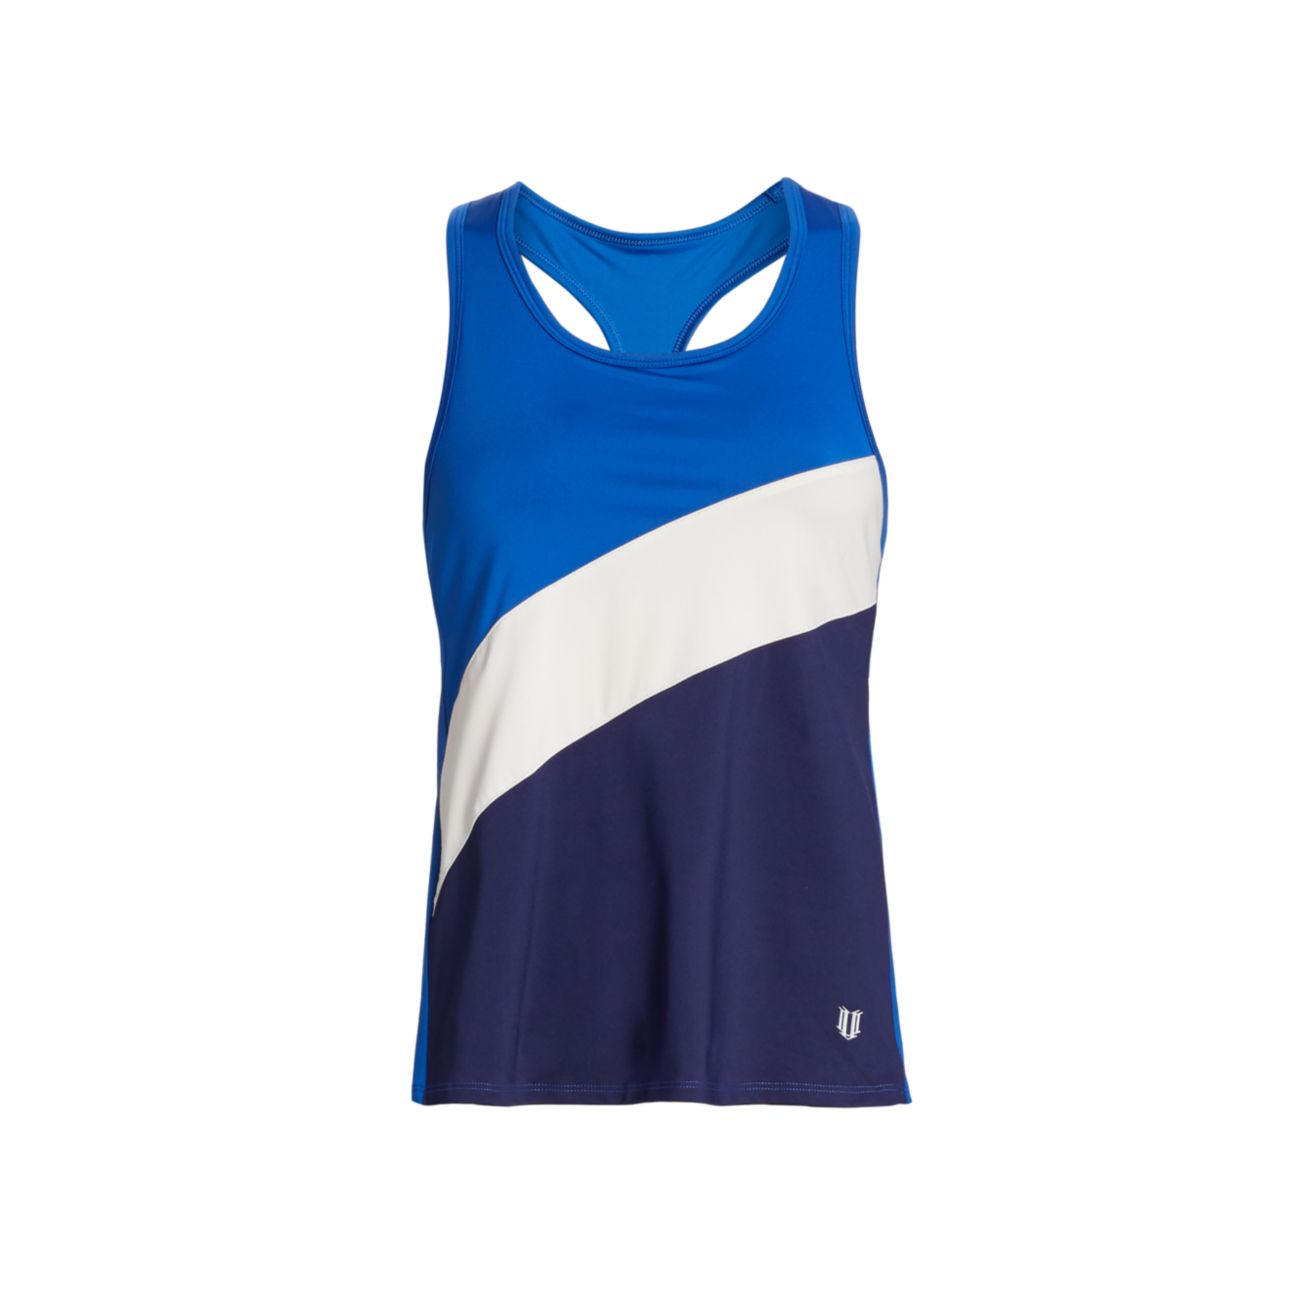 Race Day Tank Top Eleven by Venus Williams